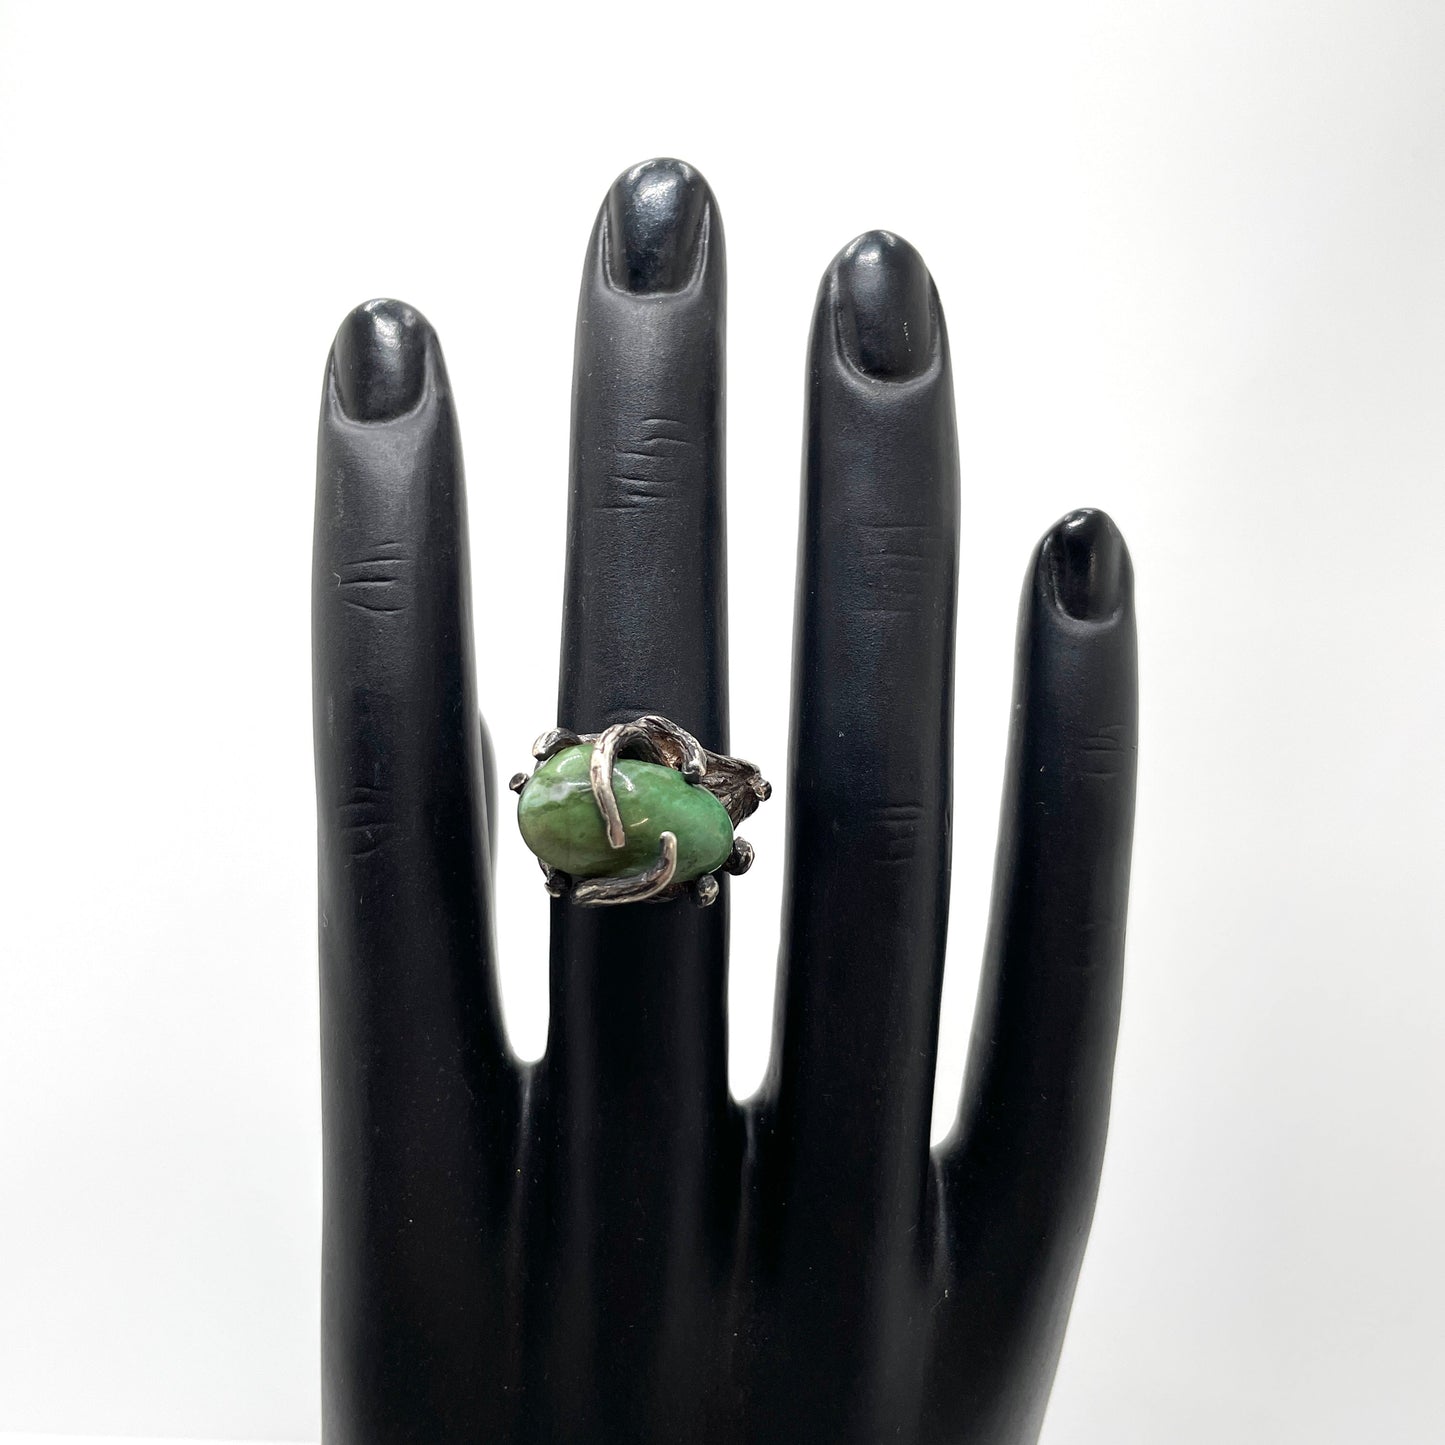 Brutalist Silver & Green Stone Ring - Size 7.25